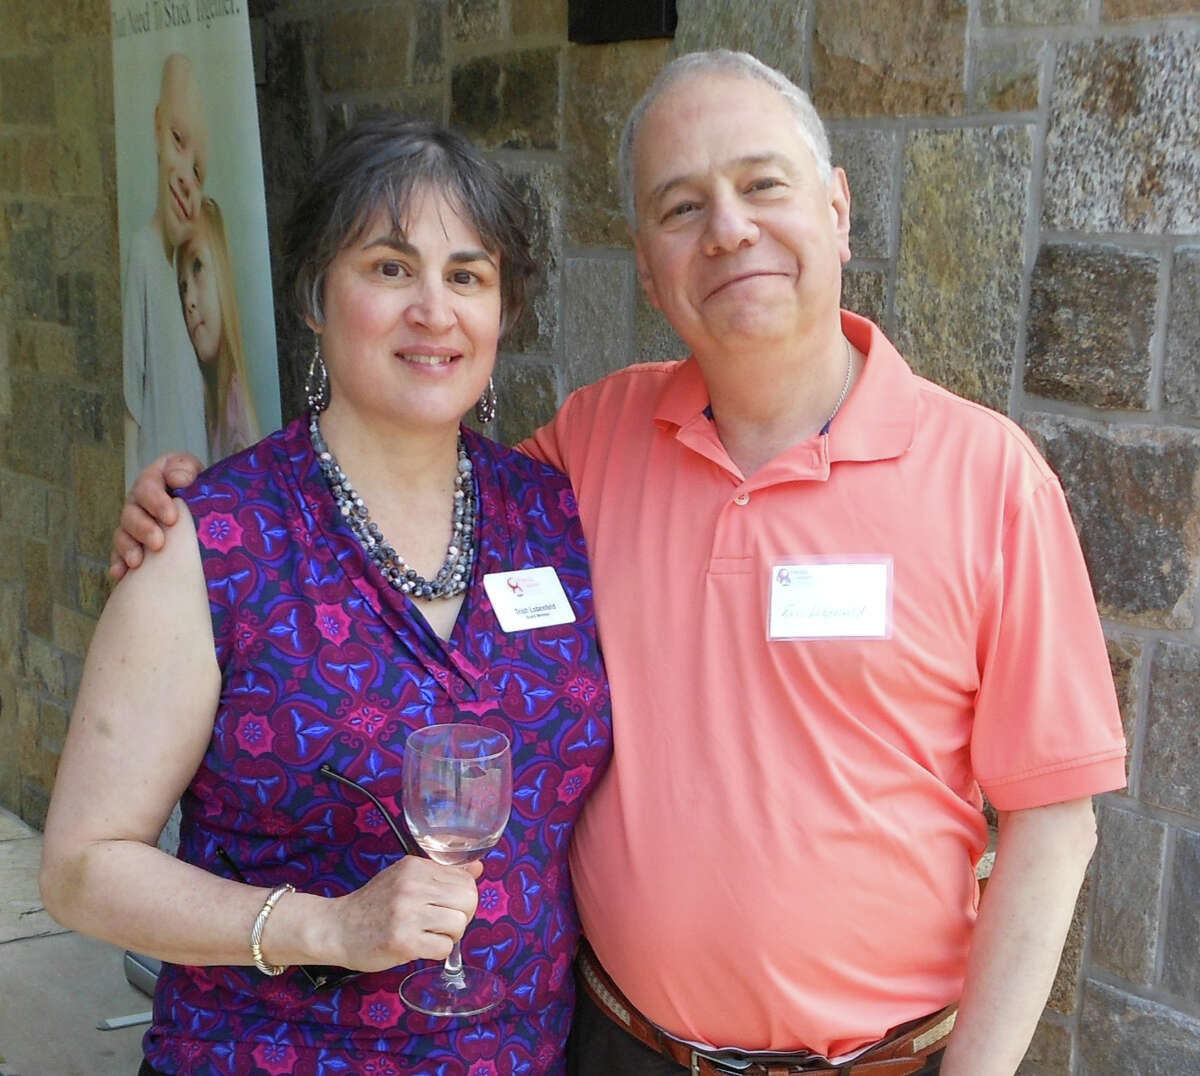 New Canaan residents Trish and Eric Lobenfeld recently hosted a meeting to kick start the Connecticut outreach initiative for Friends of Karen, a children's charity.